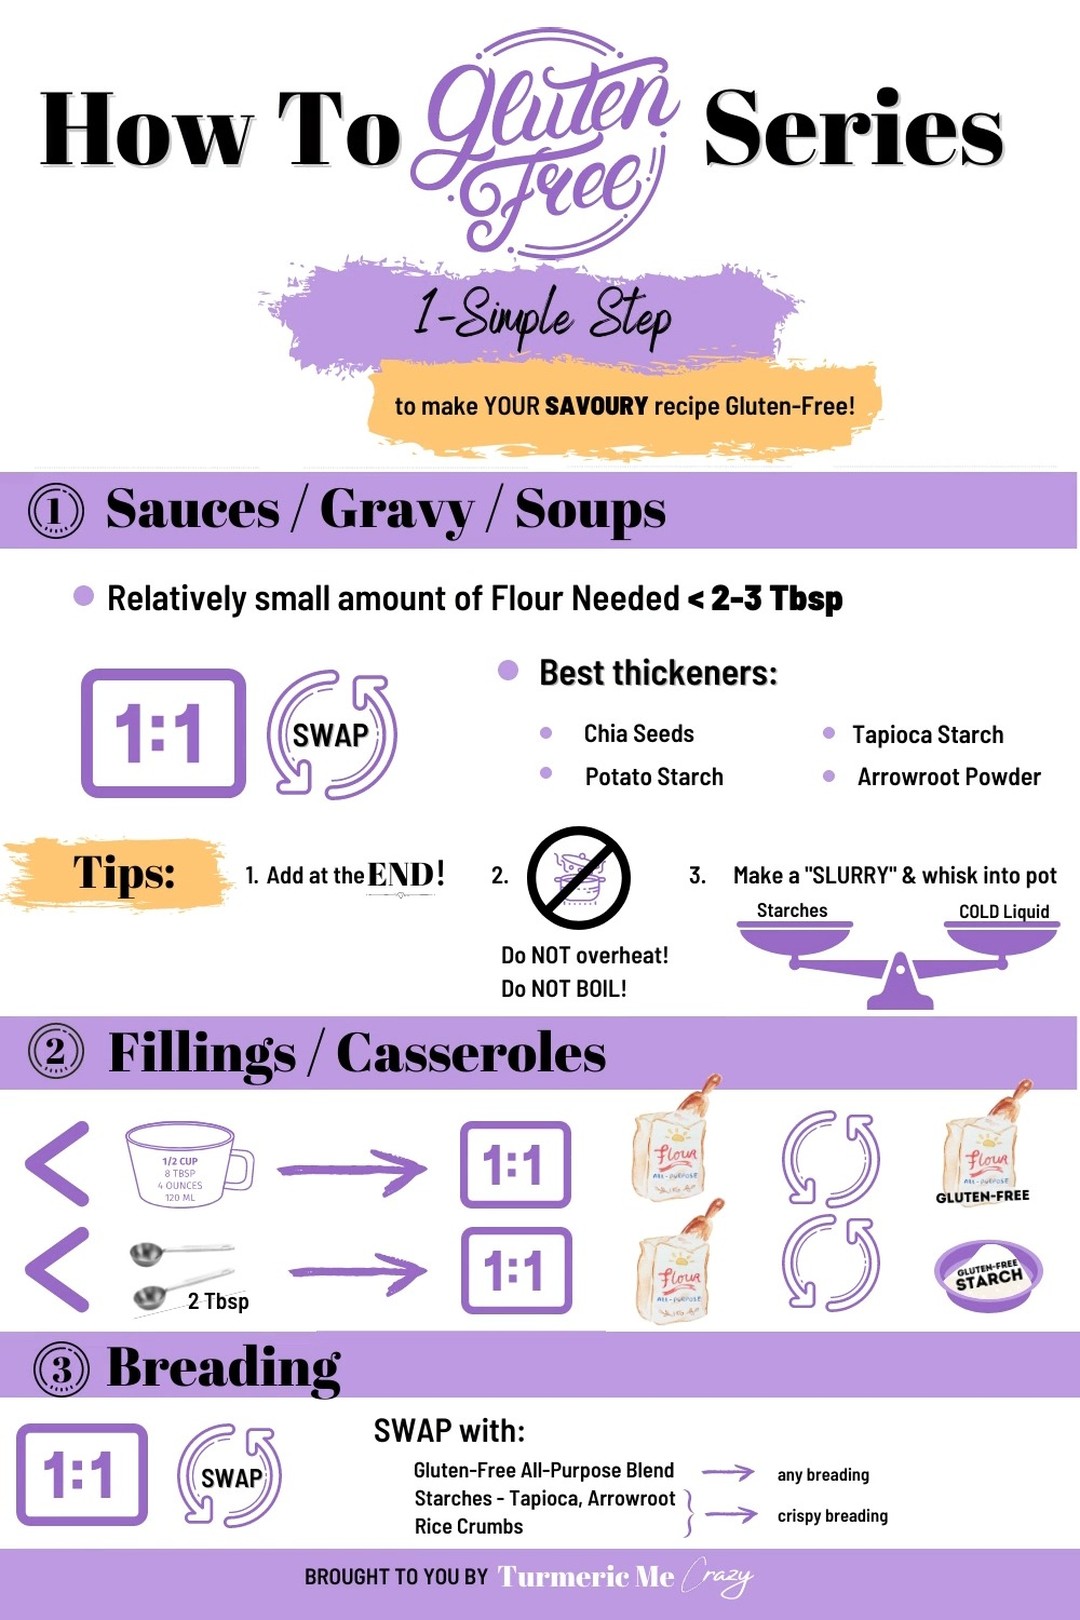 How to Gluten-Free Series - Day 6: 
How to make ANY SAVOURY Recipe Gluten-Free in 1-Simple Step - CHEAT SHEET 🥳

Do you or a loved one have a favourite family recipe that you no longer make because it contains gluten? Now you can! Just use my “cheat sheet” for How to make any SAVOURY Recipe Gluten-Free in 1-Simple Step as a reference and your ready to go! 

I sure hope this cheat sheet helps you or someone you know be able to eat your most loved foods again!

Full Post: https://turmericmecrazy.com/how-to-make-any-savoury-recipe-gluten-free-in-1-simple-step-cheat-sheet-2